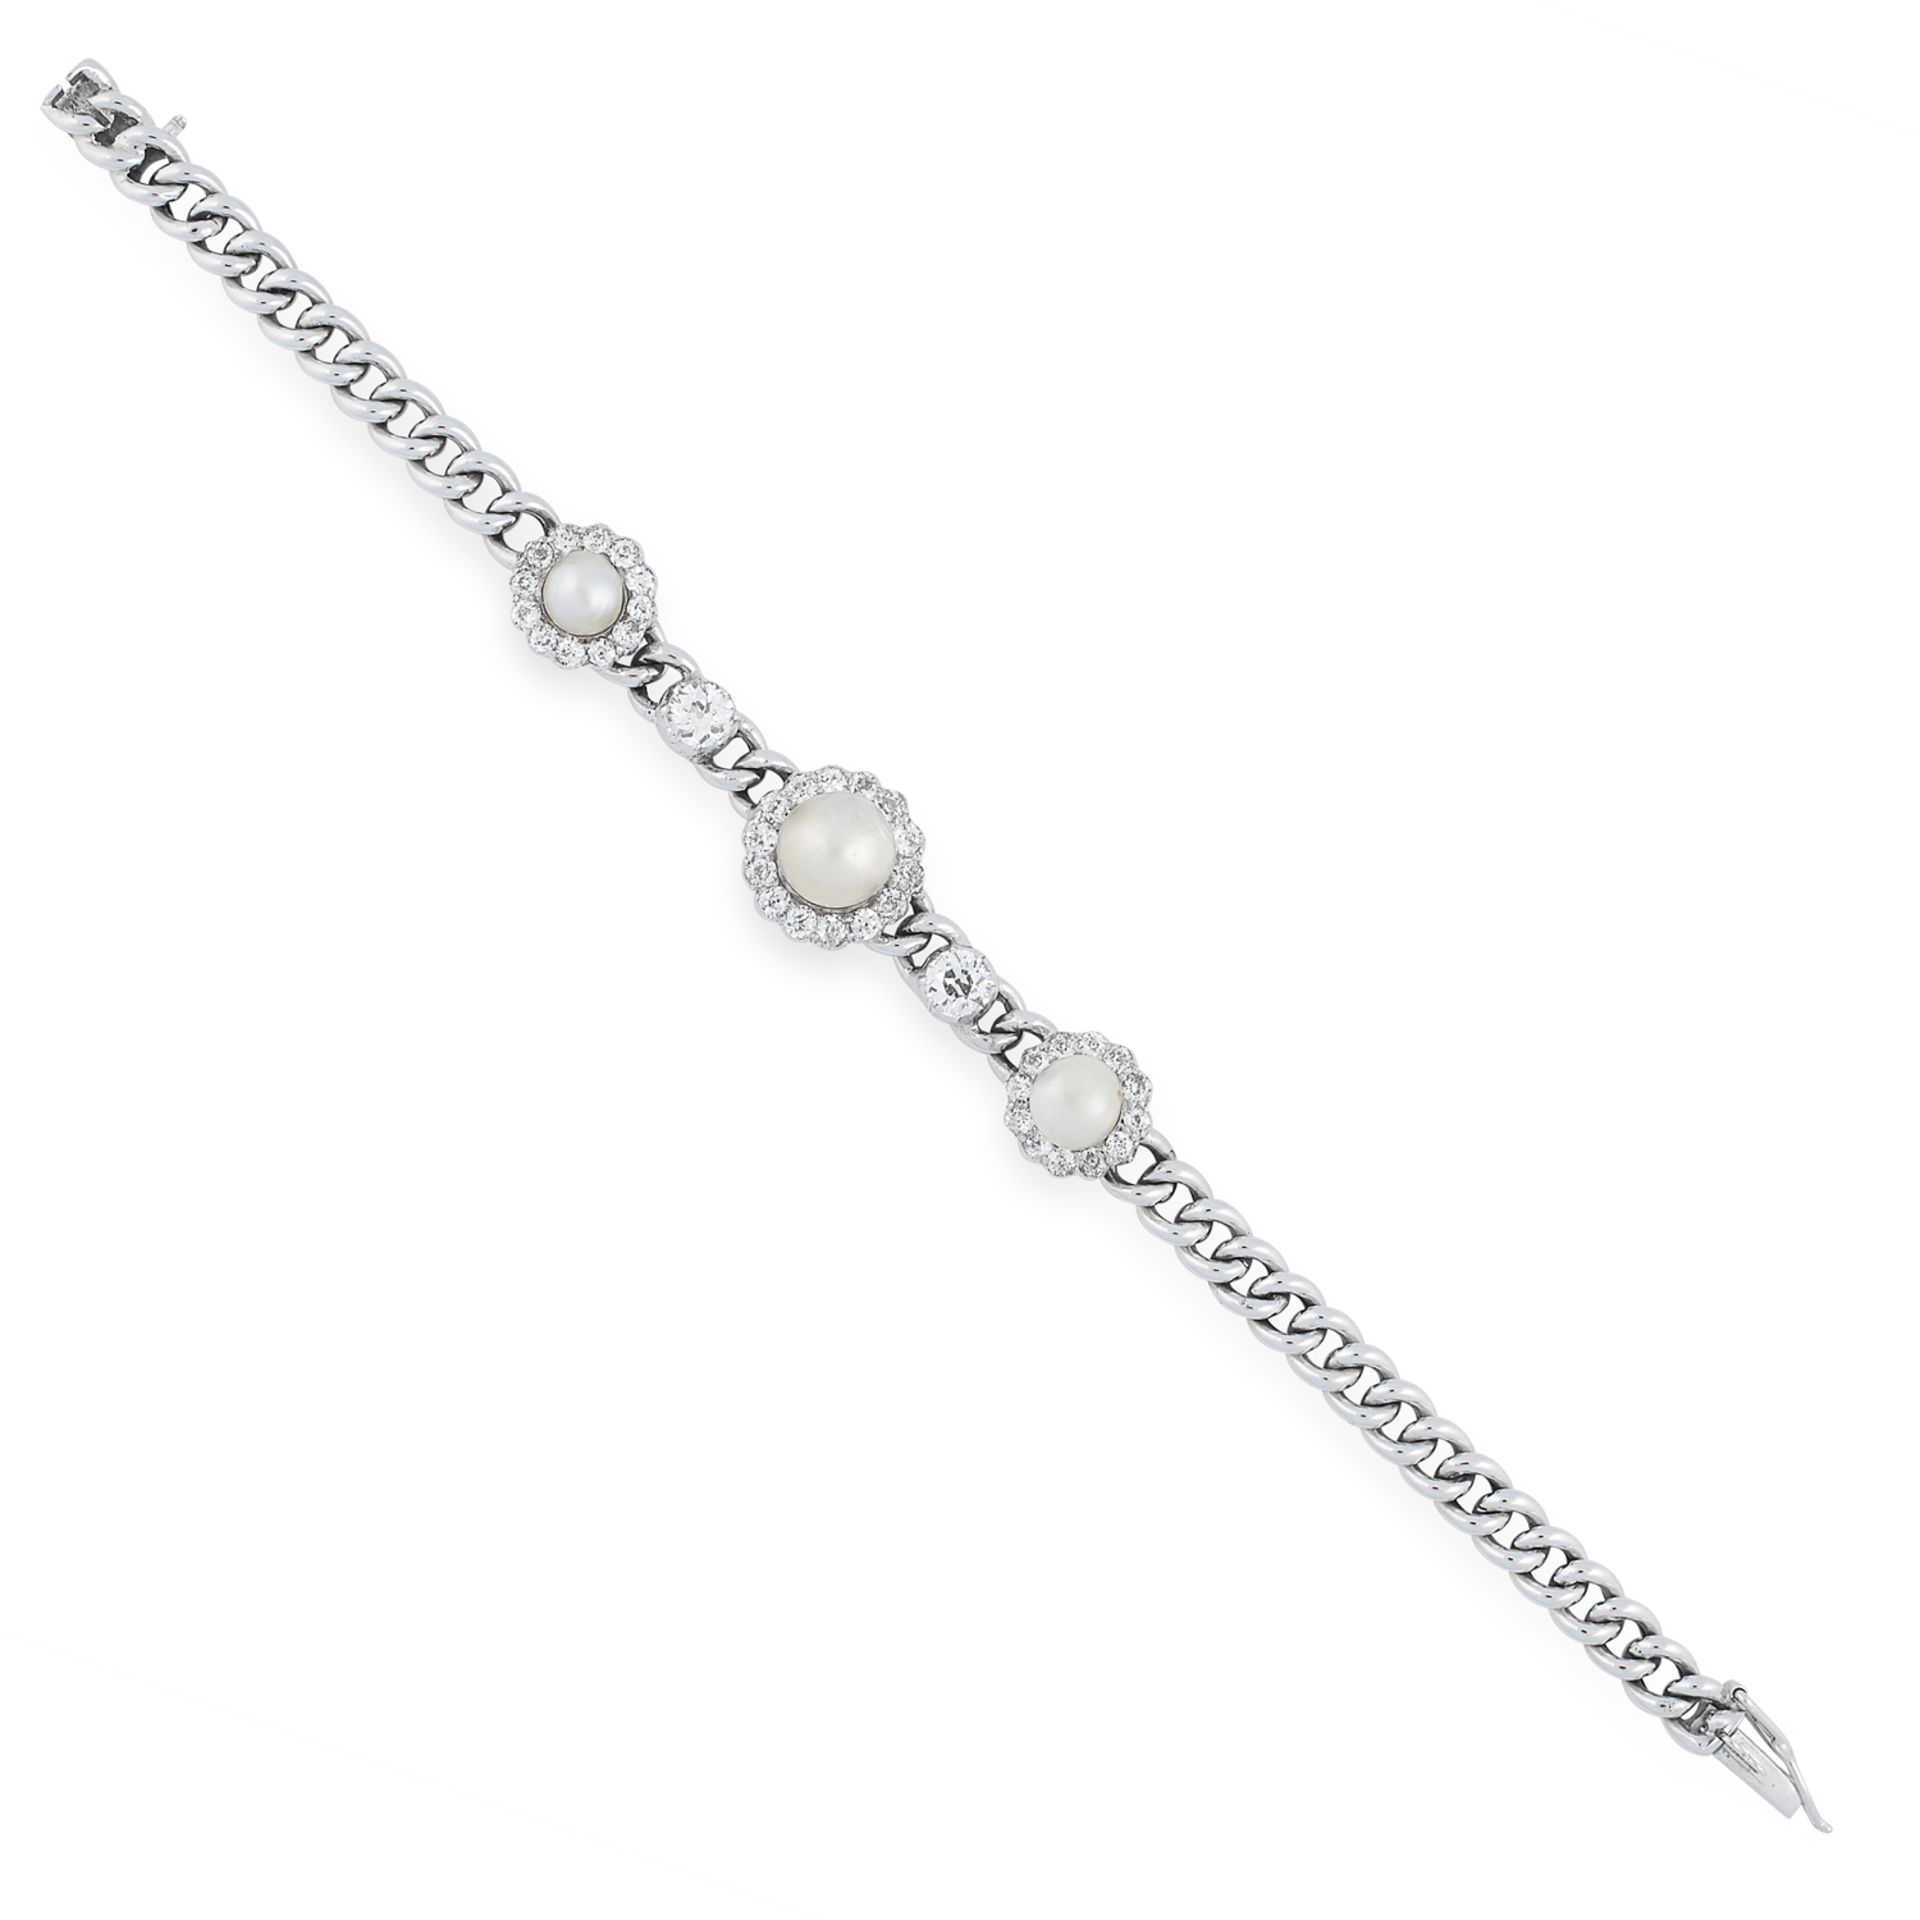 A NATURAL SALTWATER PEARL AND DIAMOND BRACELET set